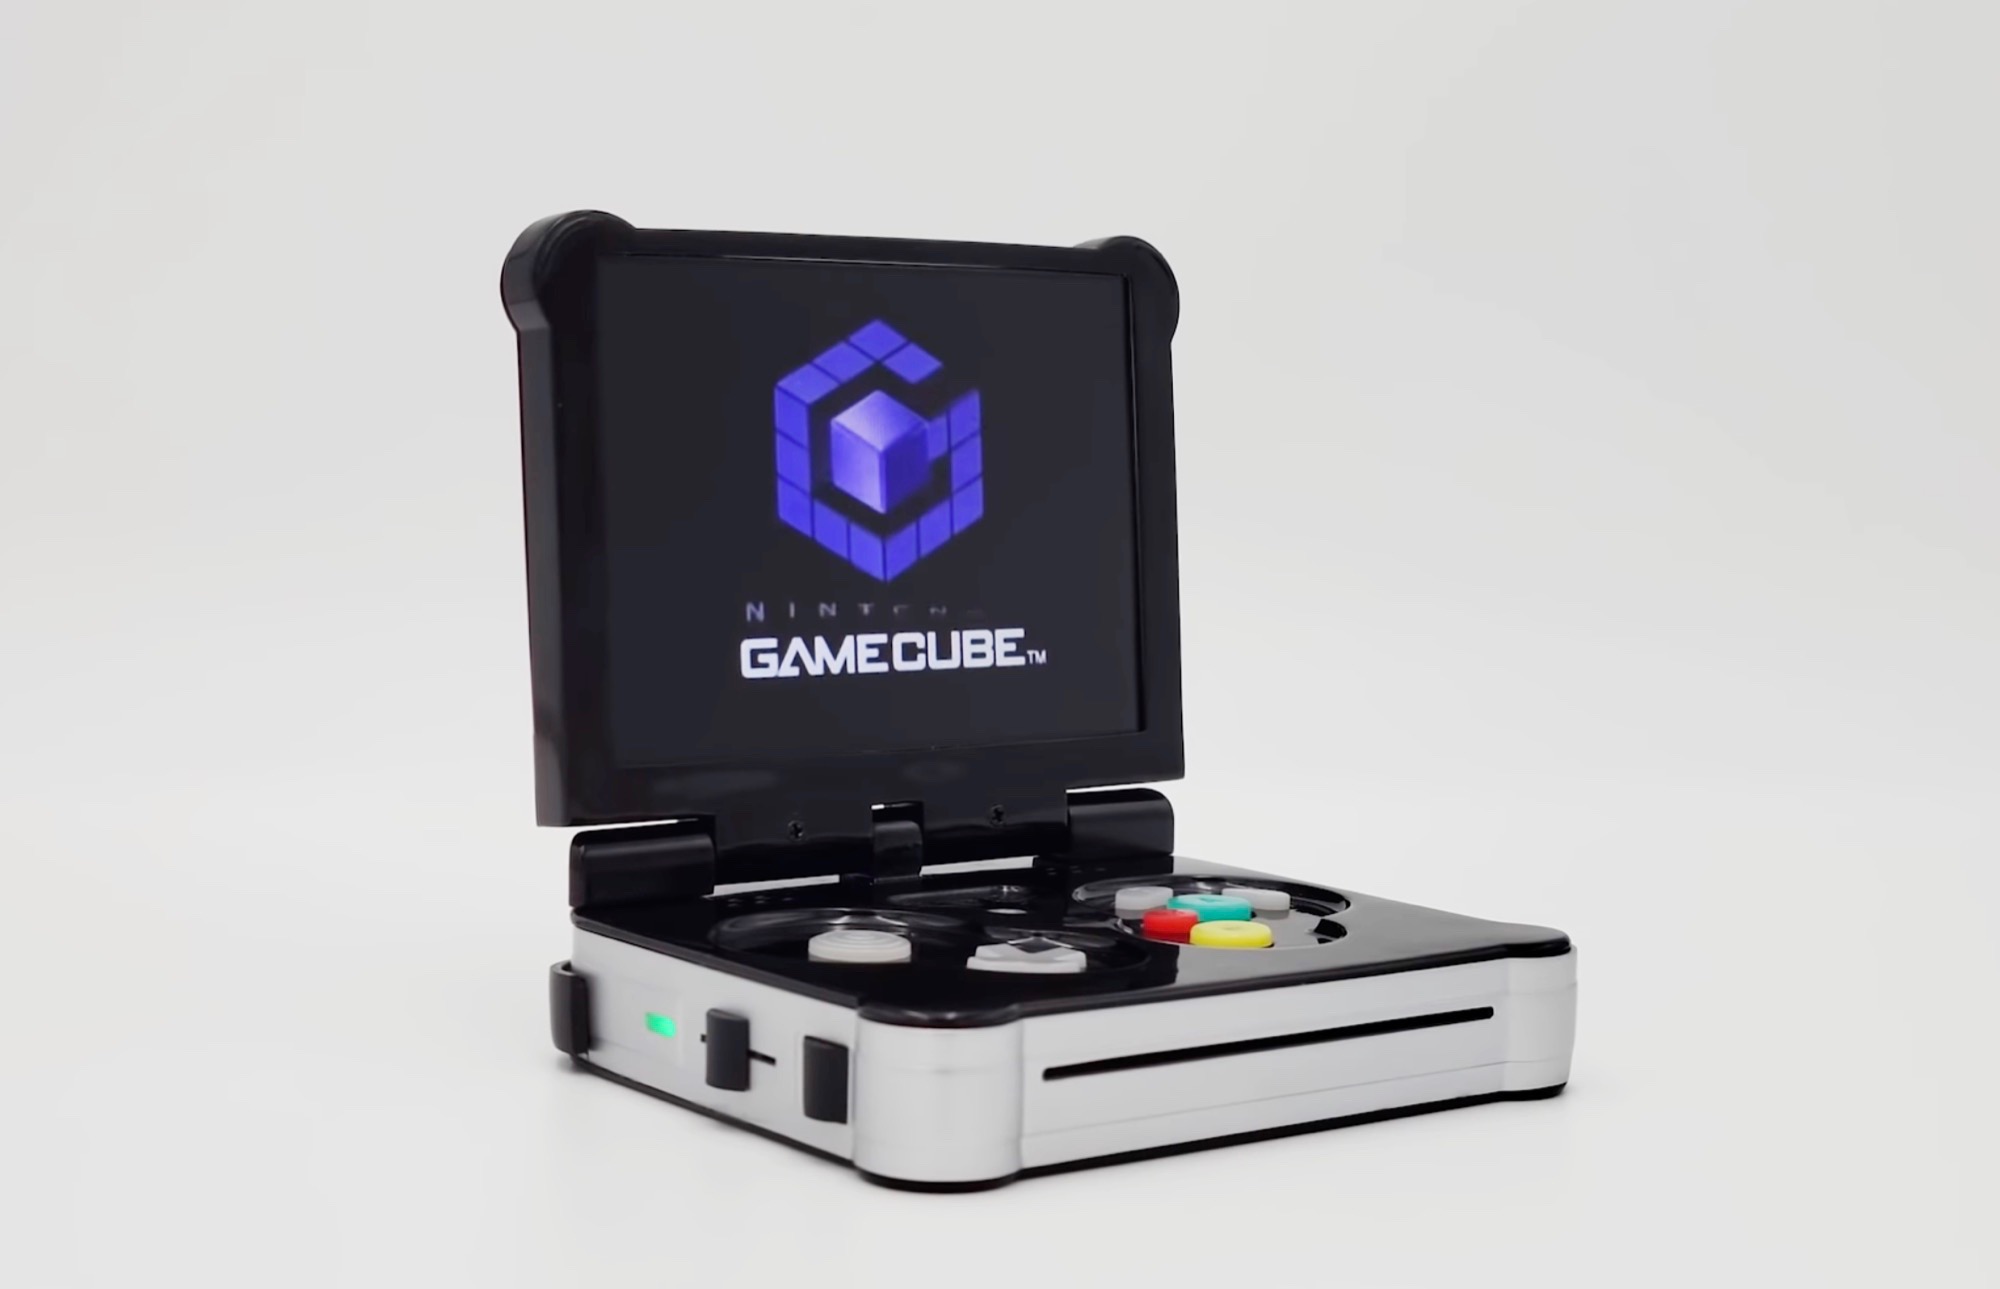 Infamous Nintendo GameCube handheld is finally a reality with some